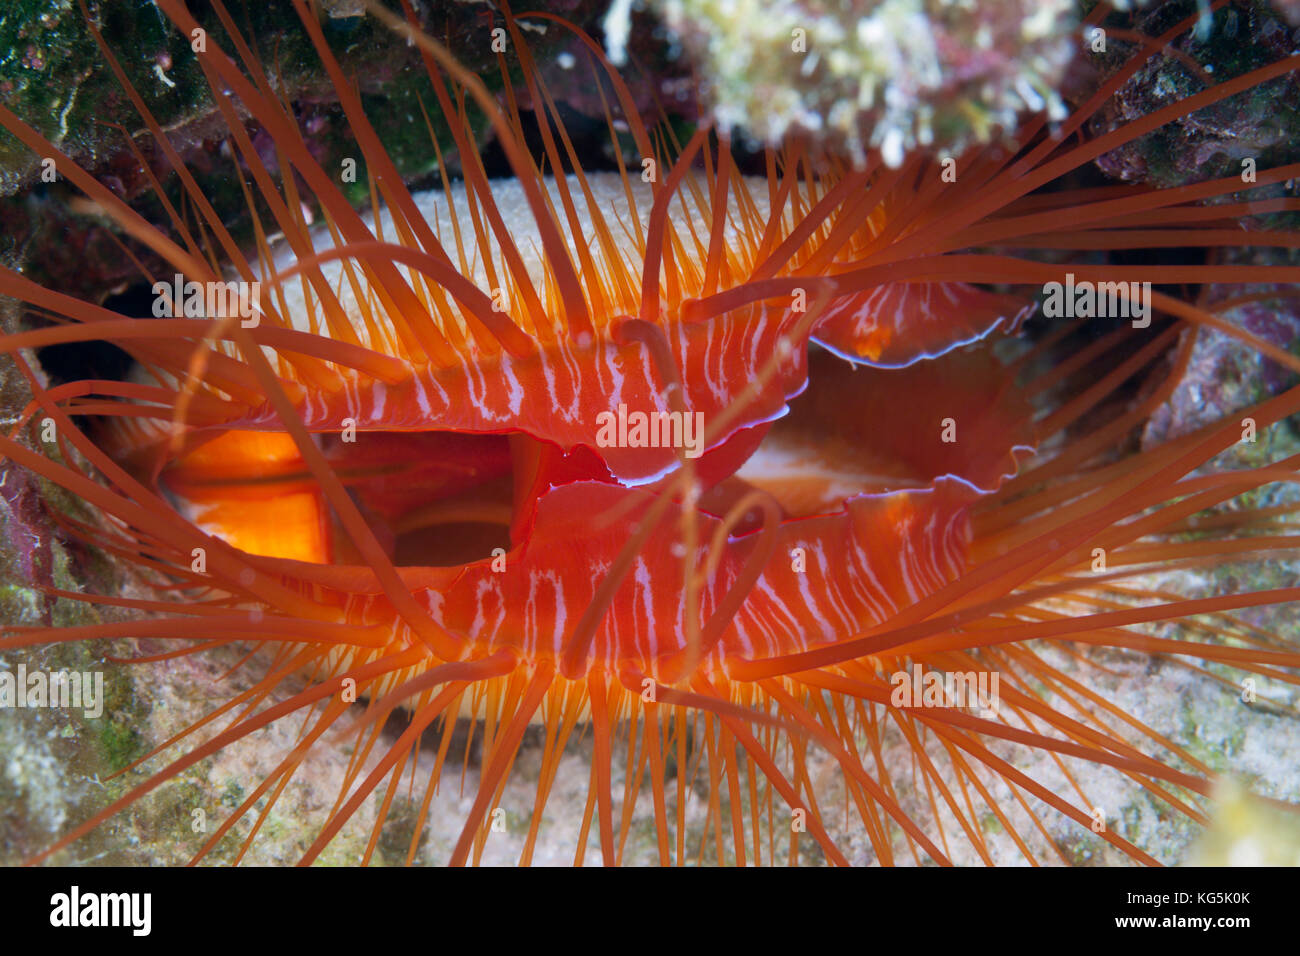 Close up of Electric Flame Scallop, Ctenoides ales, Christmas Island, Australia Stock Photo